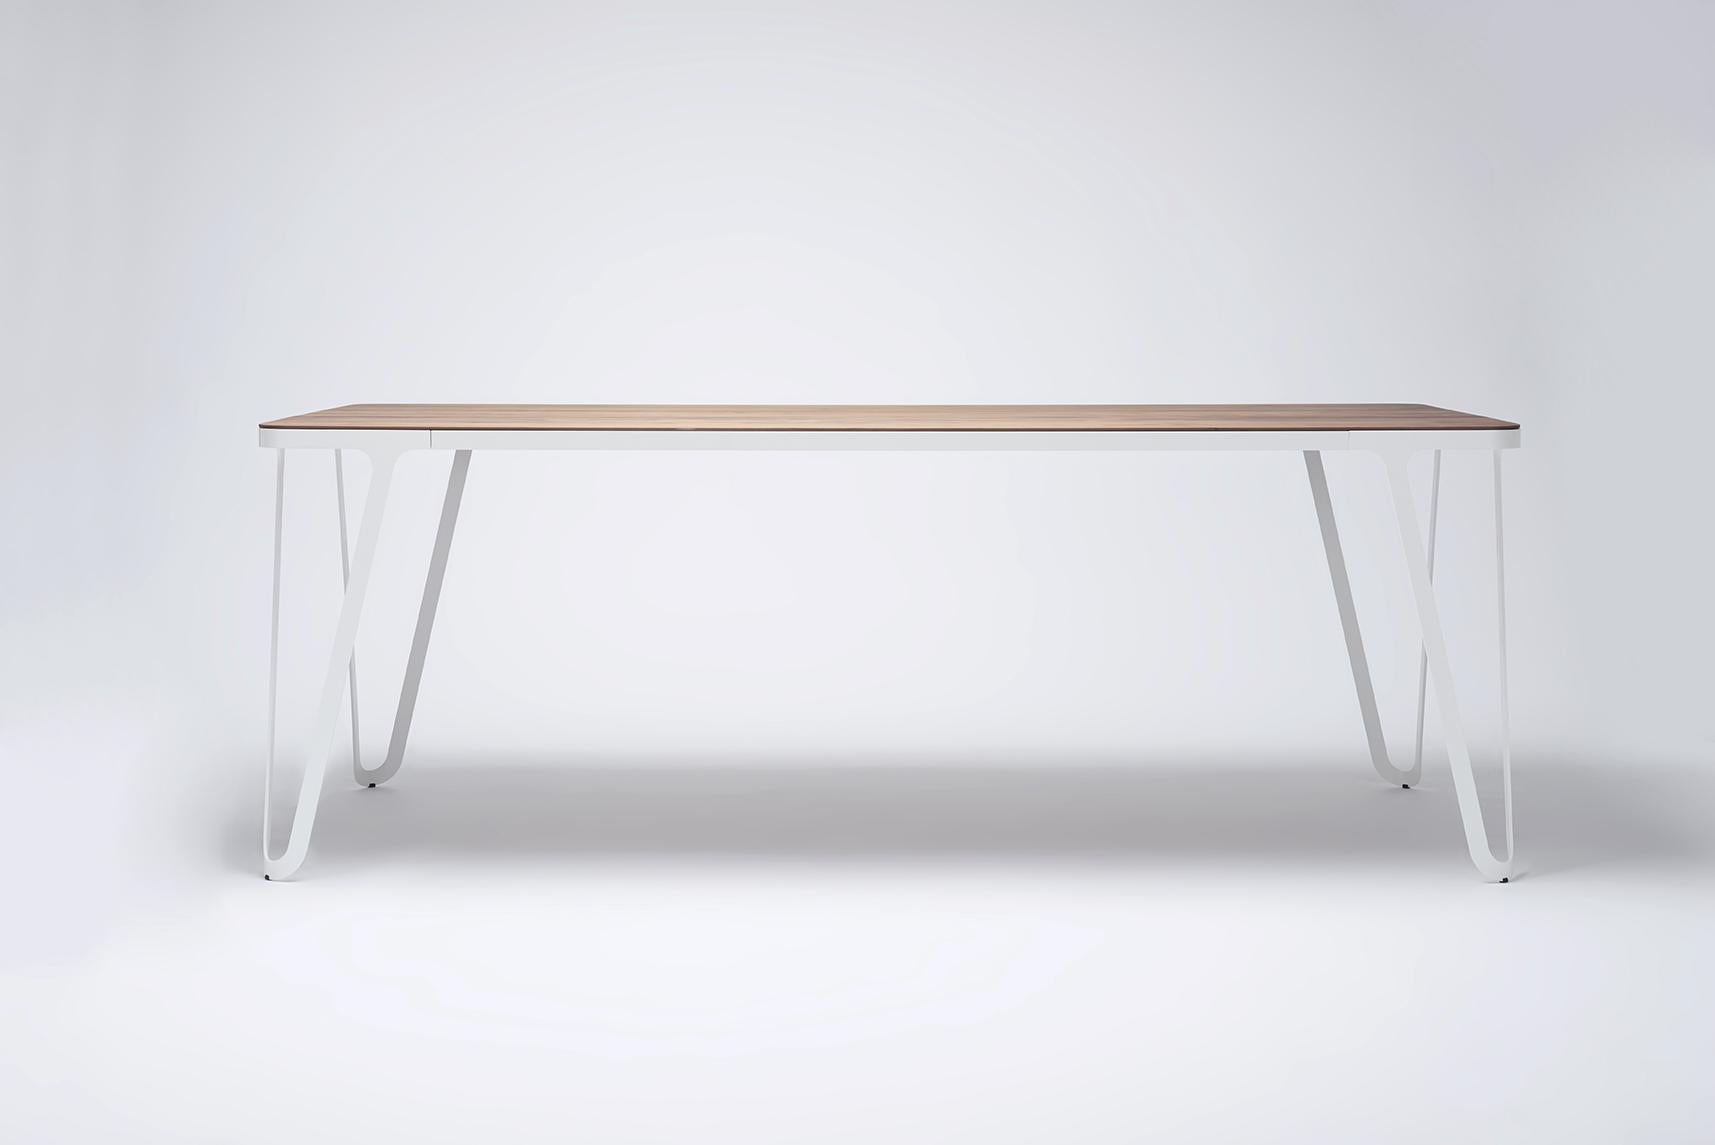 Loop Table 160 Ash by Sebastian Scherer
Dimensions: D160 x W90 x H74 cm
Materials: Ash, Aluminium, Wood
Weight: 47 kg
Also Available: Colours:Solid wood (matt lacquered or oiled): black and white stained ash / natural oak / american